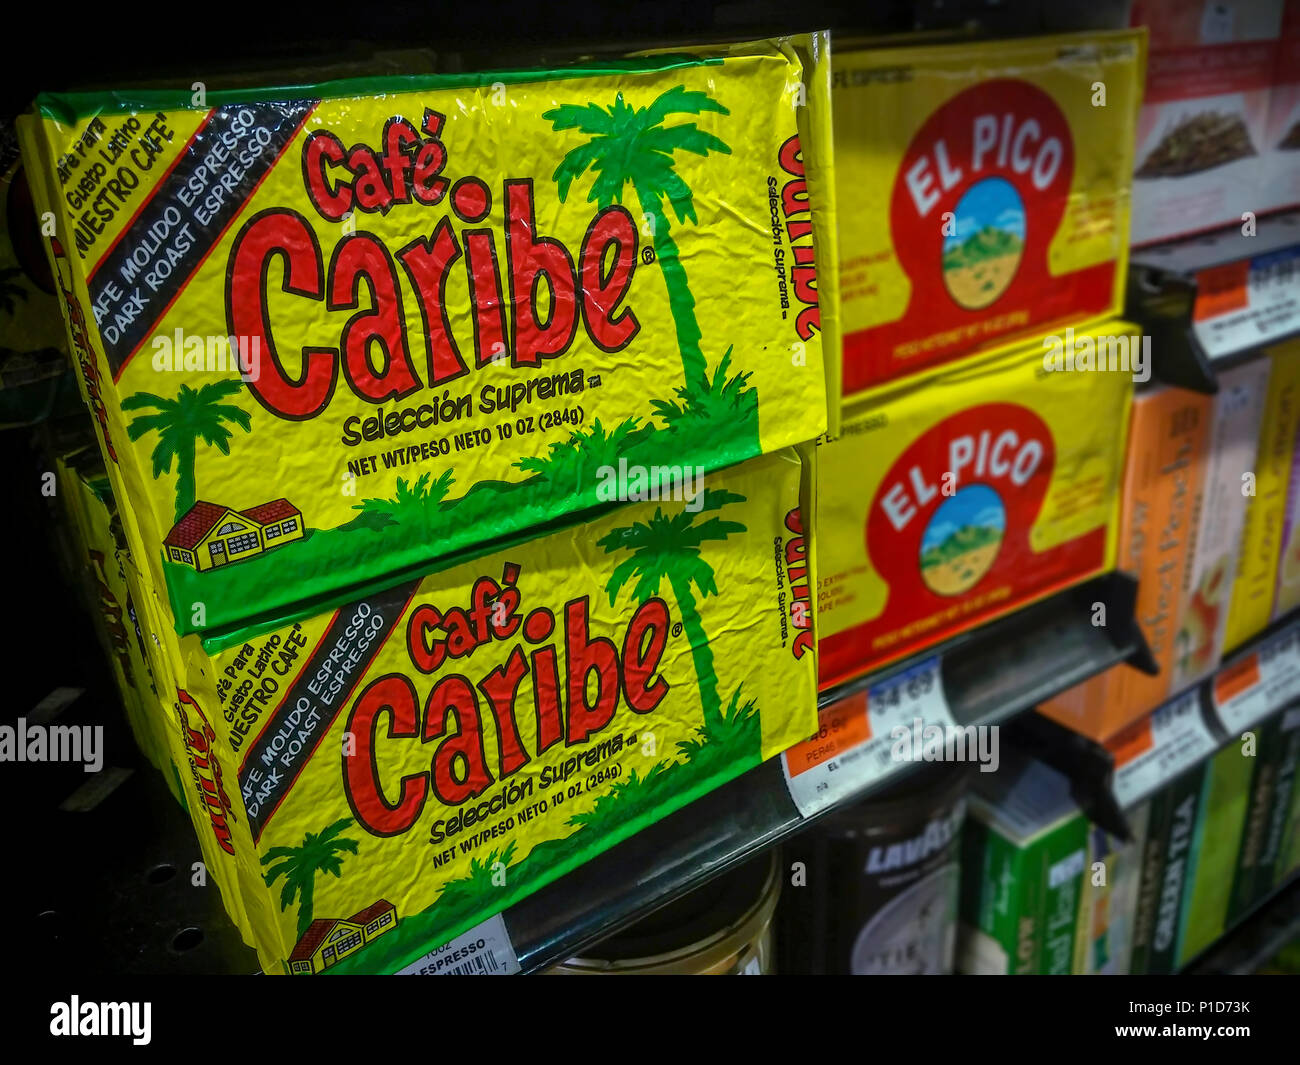 Bricks of Coffee Holding Co.'s CafÃ© Caribe brand on a supermarket shelf in New York on Wednesday, May 30, 2018. The Coffee Holding Co., Inc. manufactures and markets their coffees in the United States, Canada, Australia, England, and China. (Â© Richard B. Levine) Stock Photo